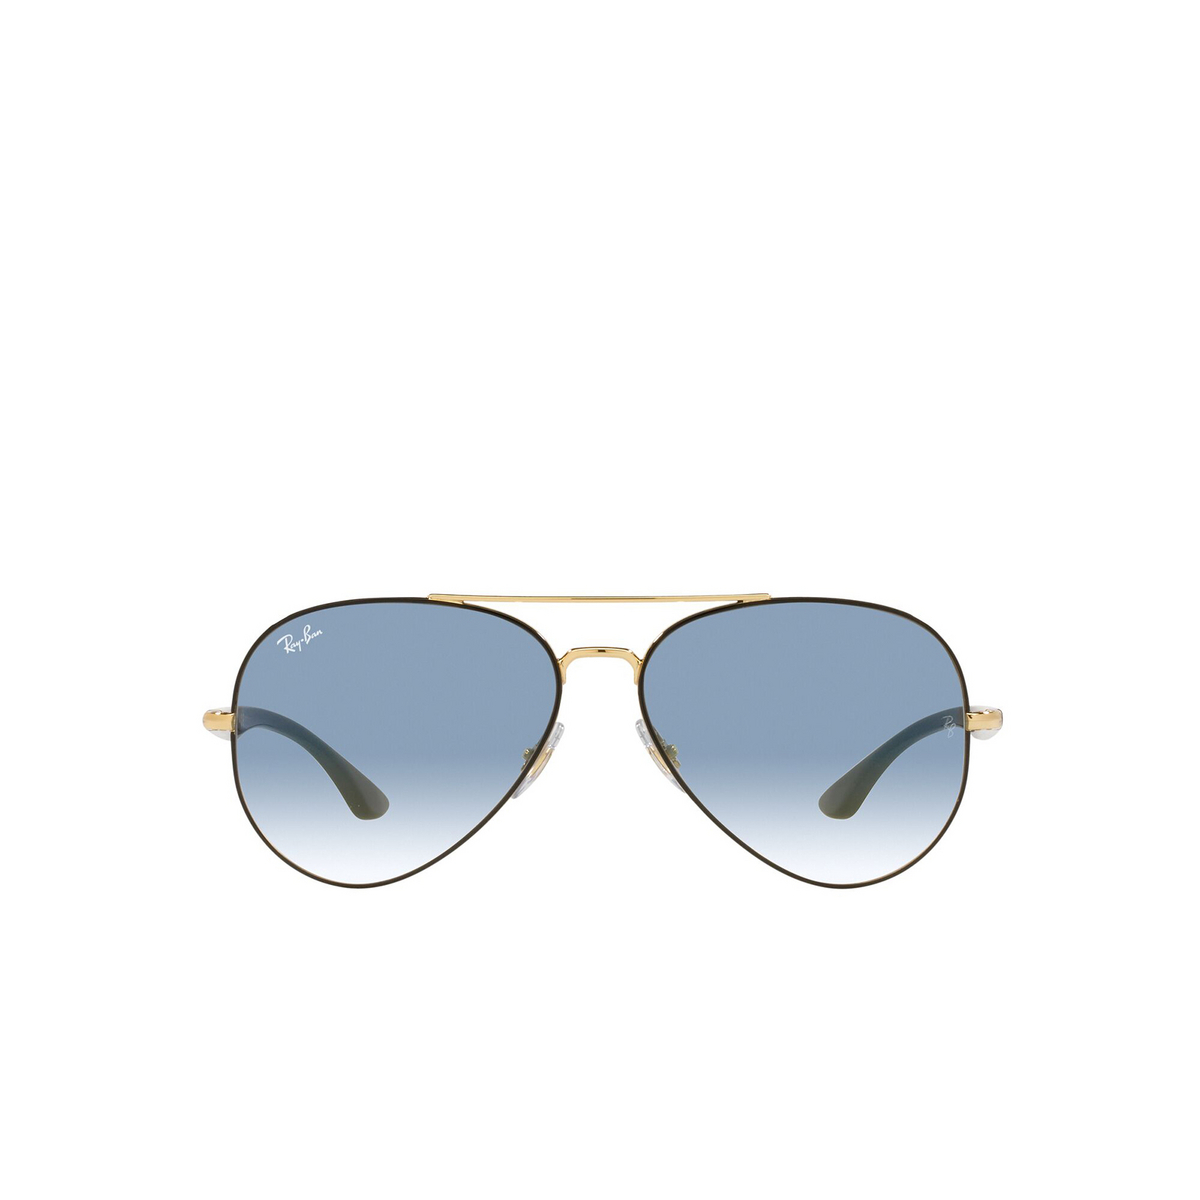 Ray-Ban® Aviator Sunglasses: RB3675 color Black On Arista 90003F - front view.